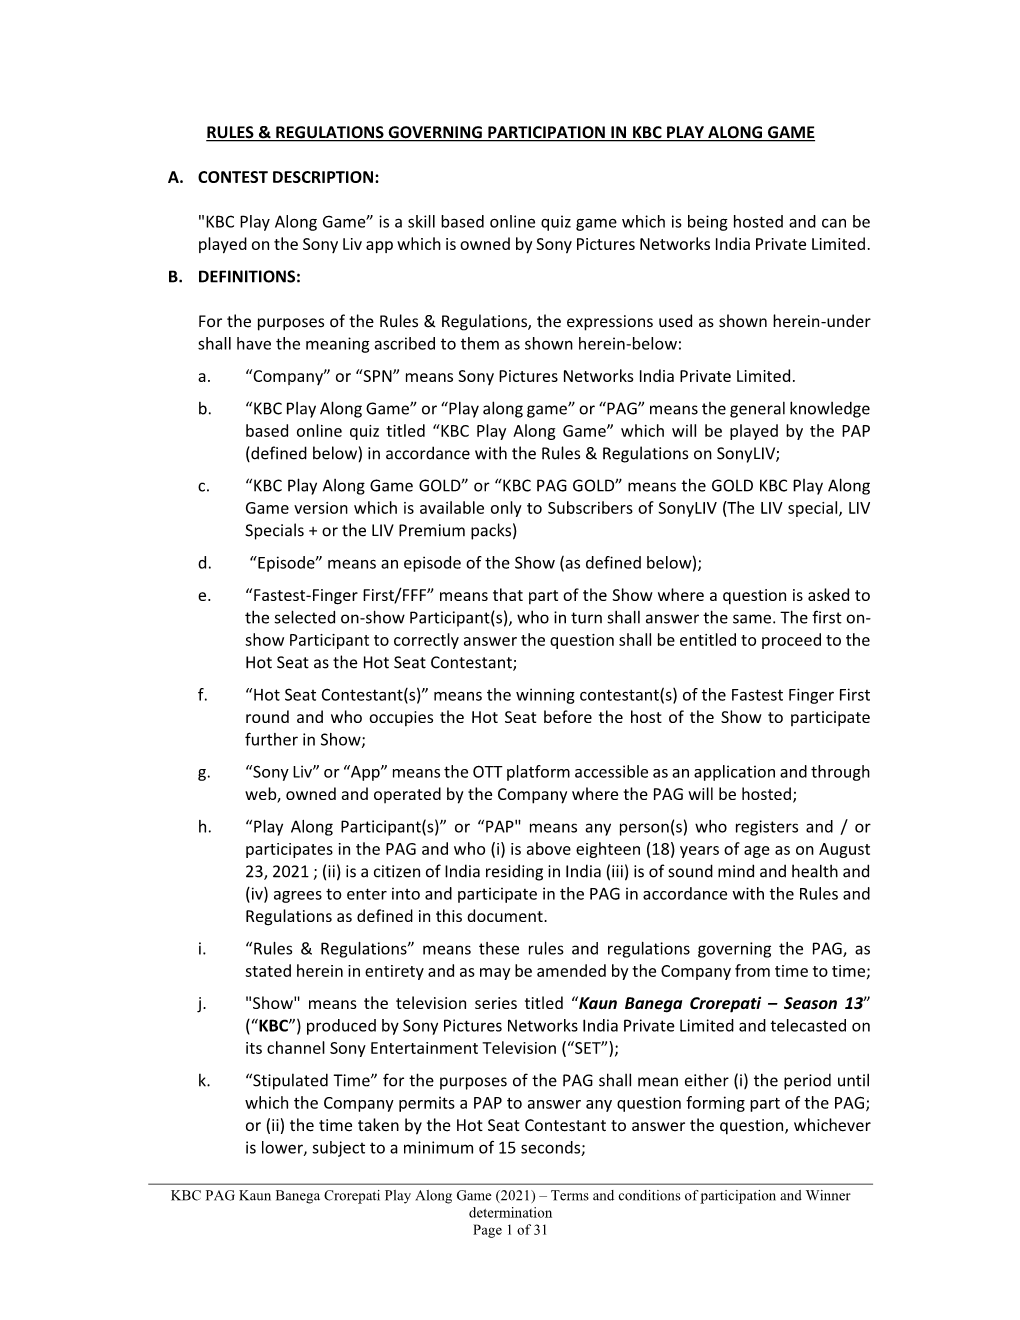 Rules & Regulations Governing Participation in Kbc Play Along Game